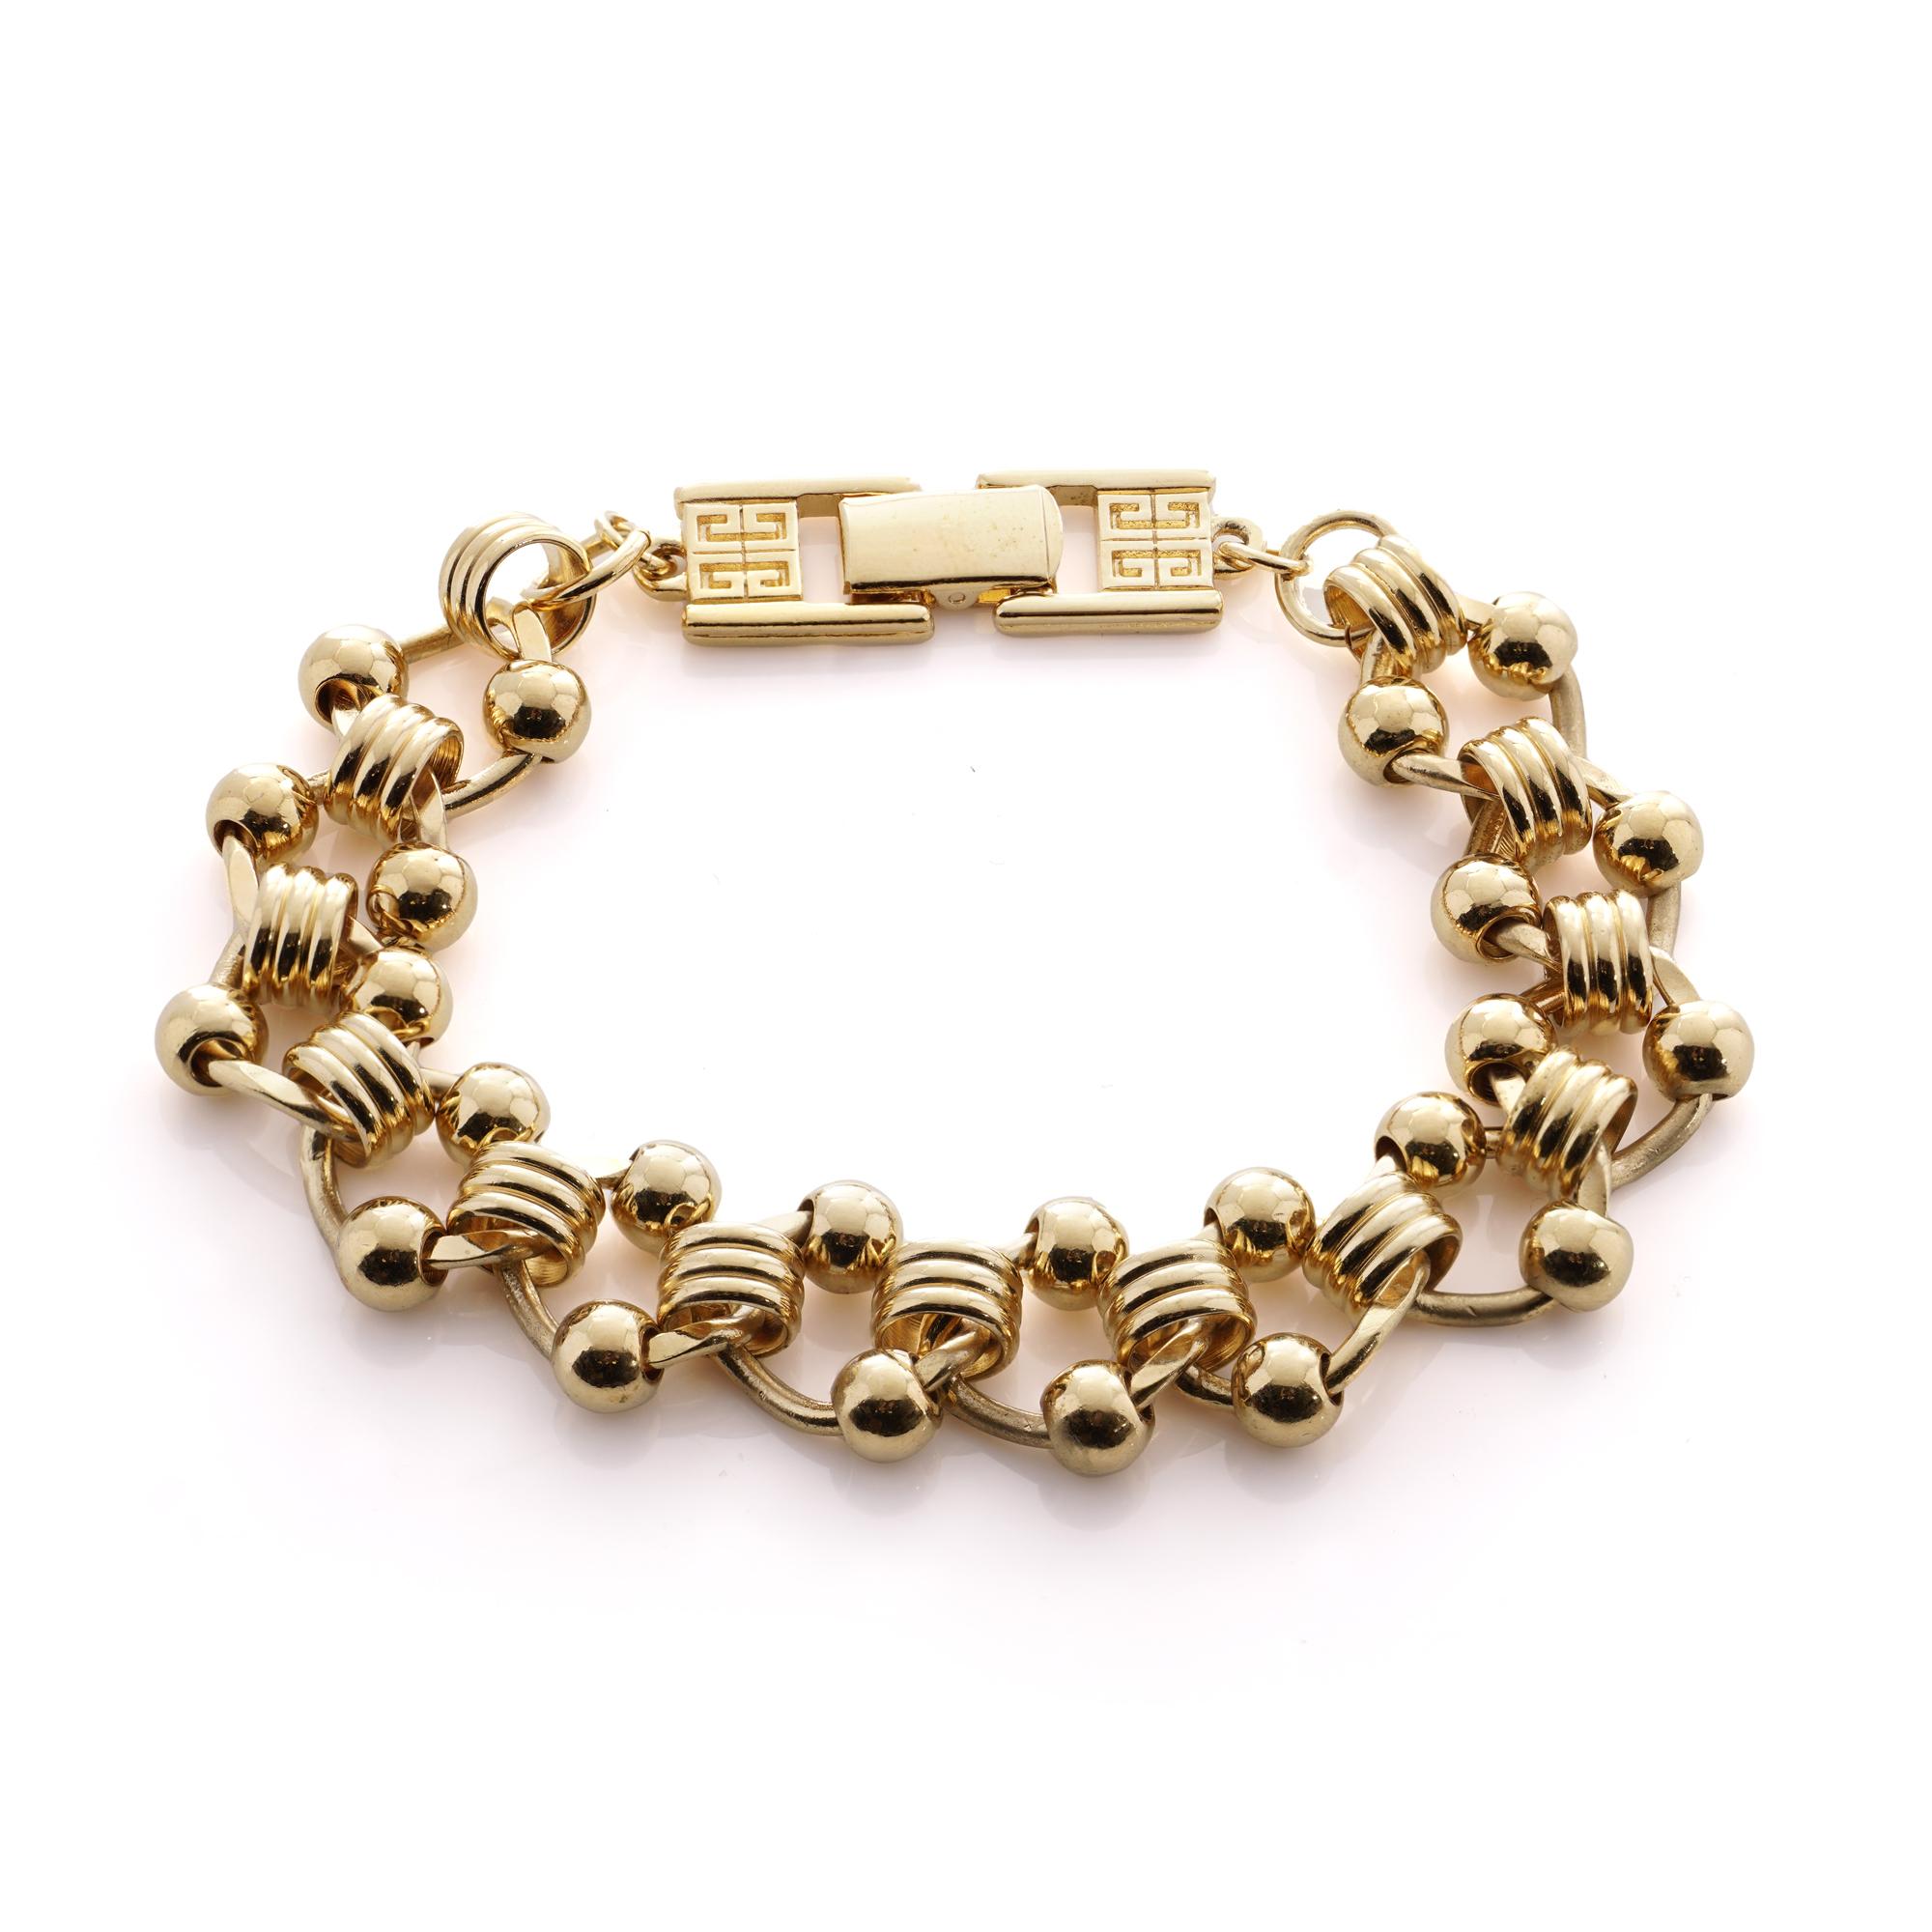 Vintage Gold Tone Link Bracelet In Good Condition For Sale In Braintree, GB